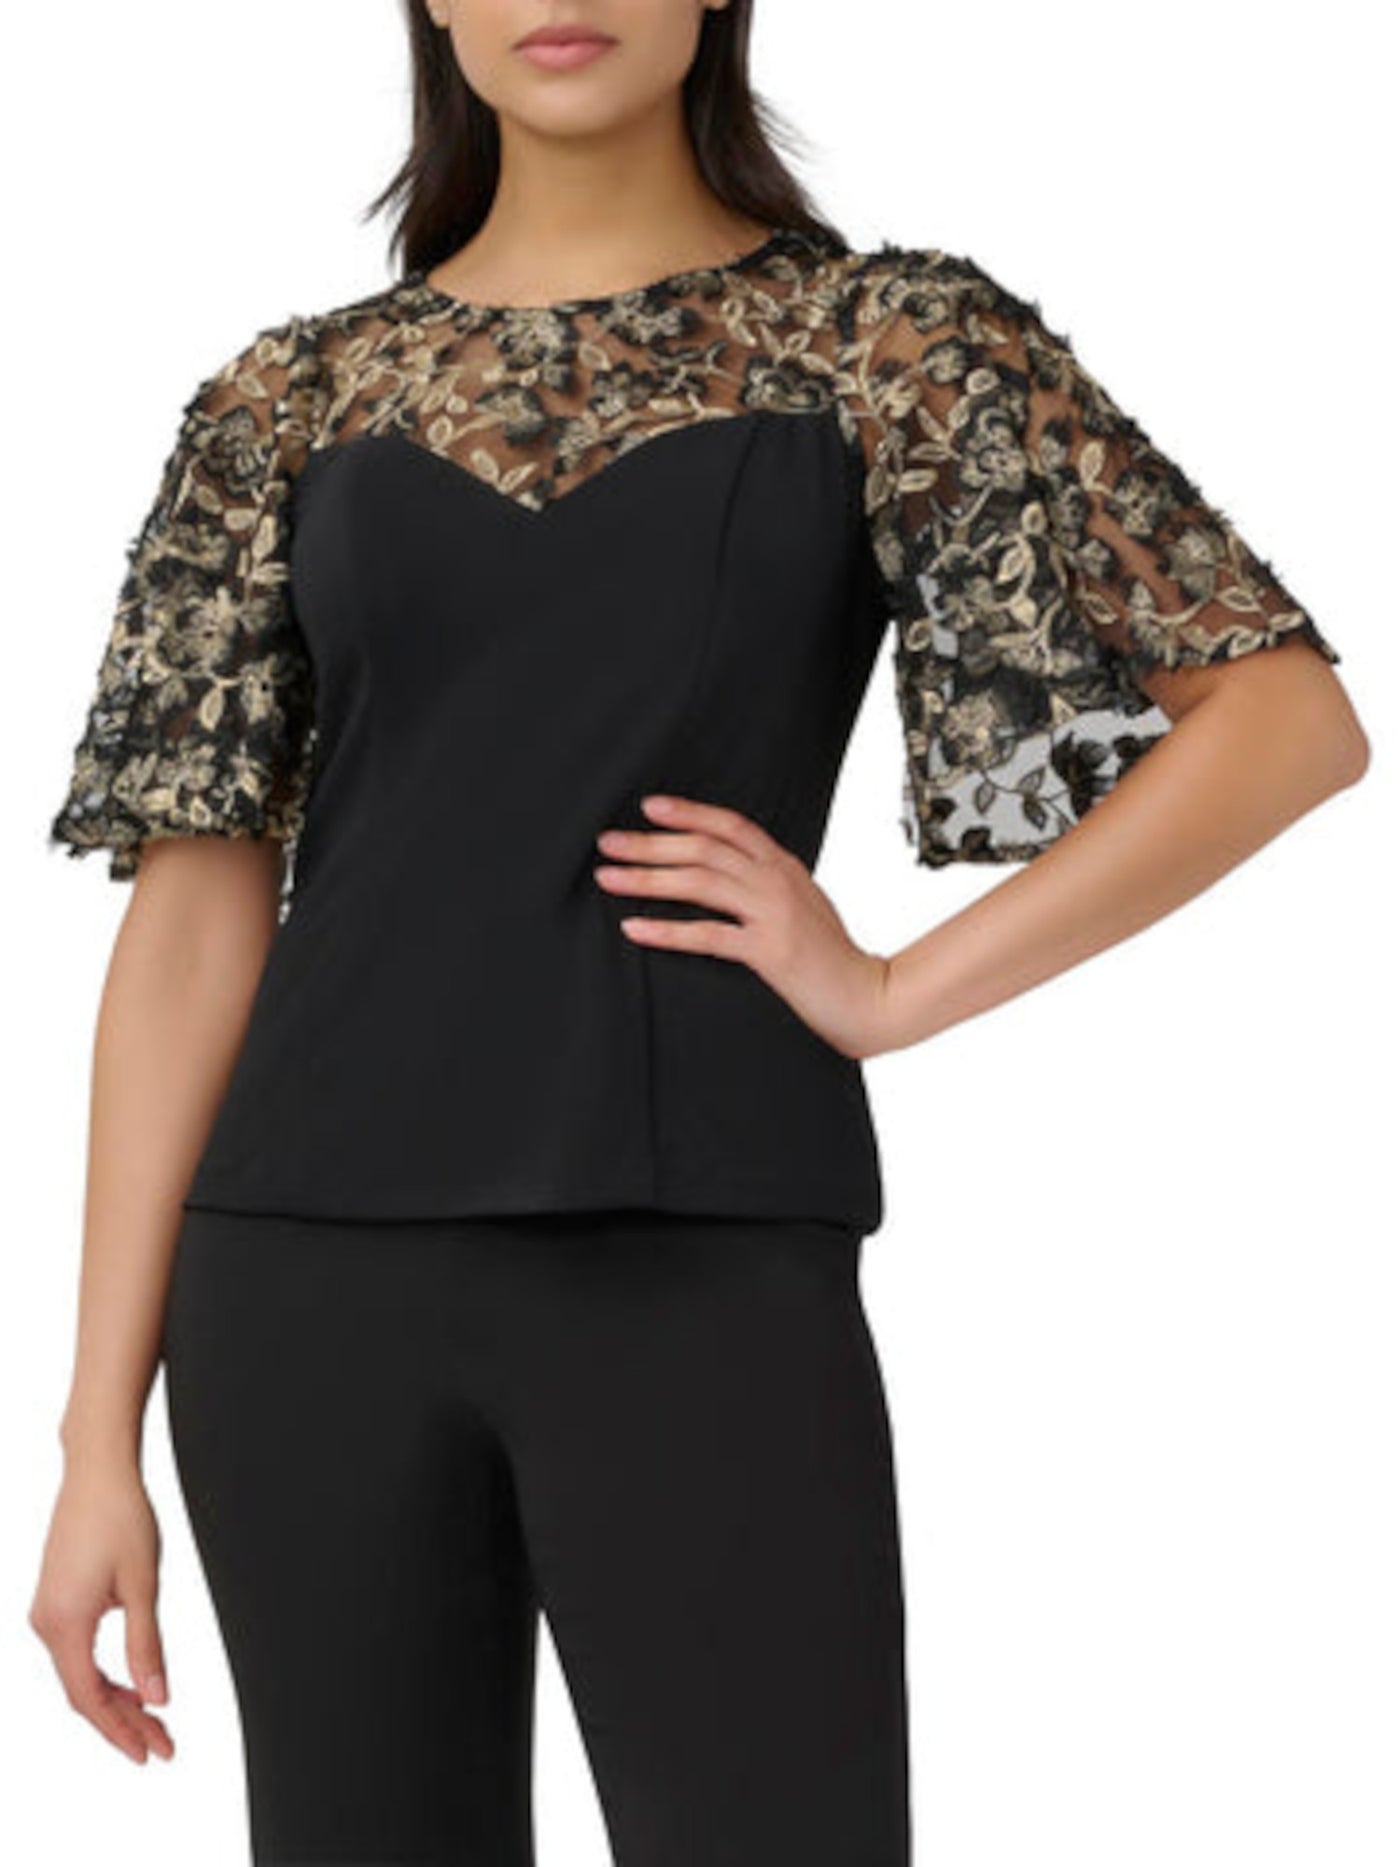 ADRIANNA PAPELL Womens Black Zippered 3d Embroidered Illusion Mesh Flutter Sleeve Boat Neck Cocktail Top 4